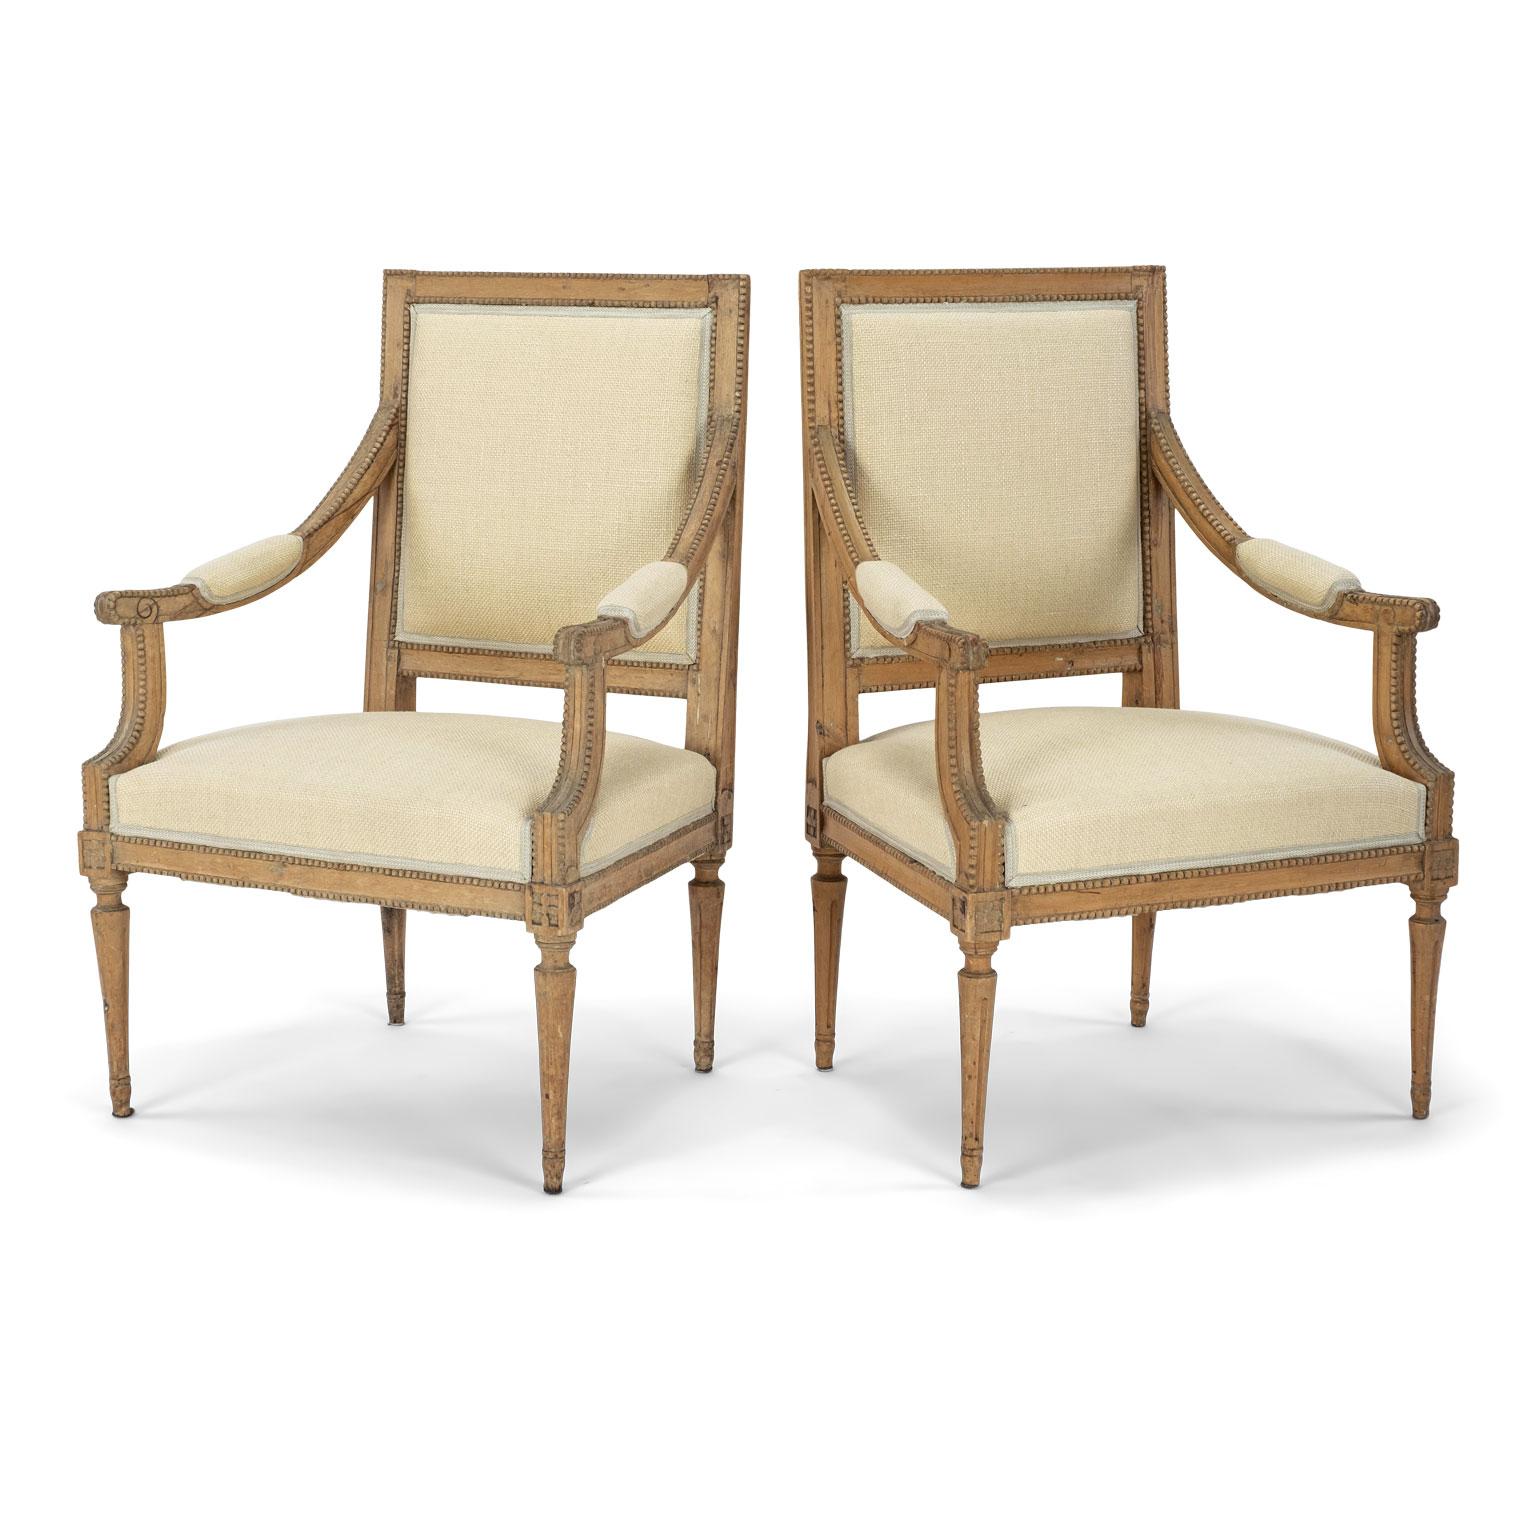 Hand-Carved Pair of Neoclassical Swedish Armchairs